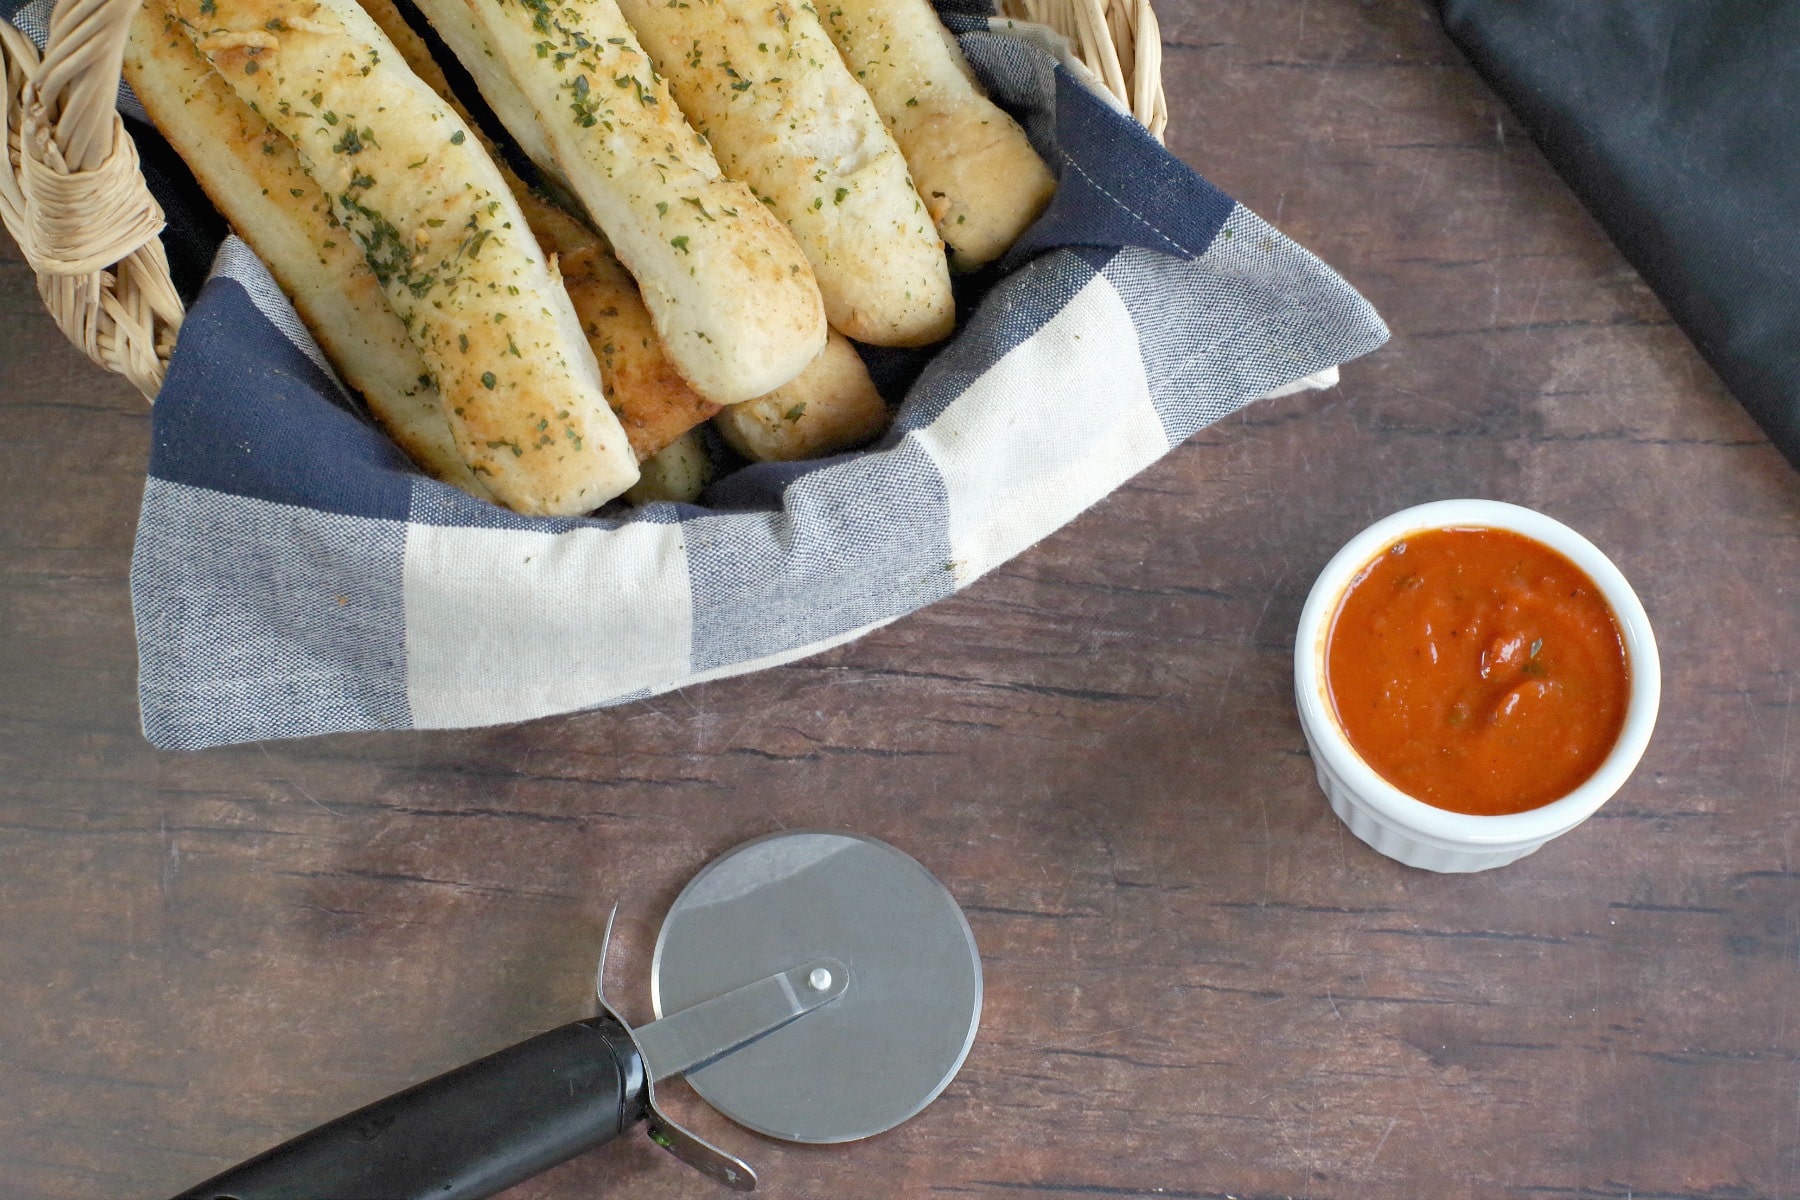 Italian breadsticks in a basket with pizza sauce on the side and a pizza cutter